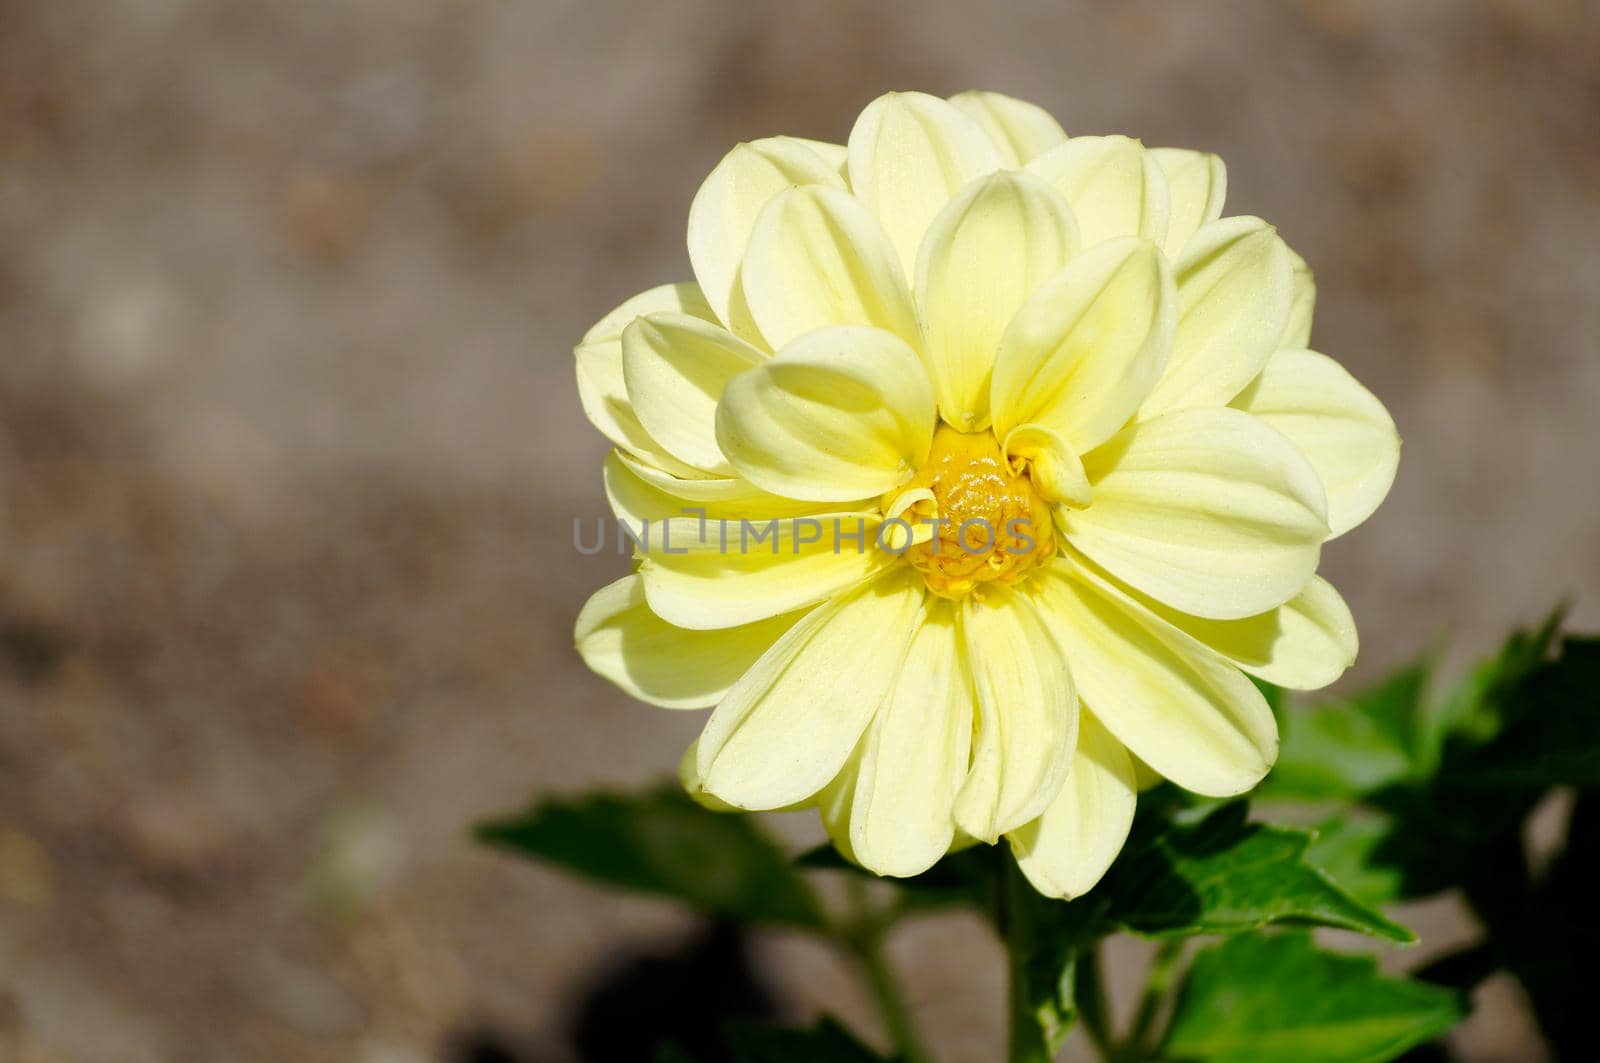 A single yellow flower bloomed in the flower bed close up by Mastak80